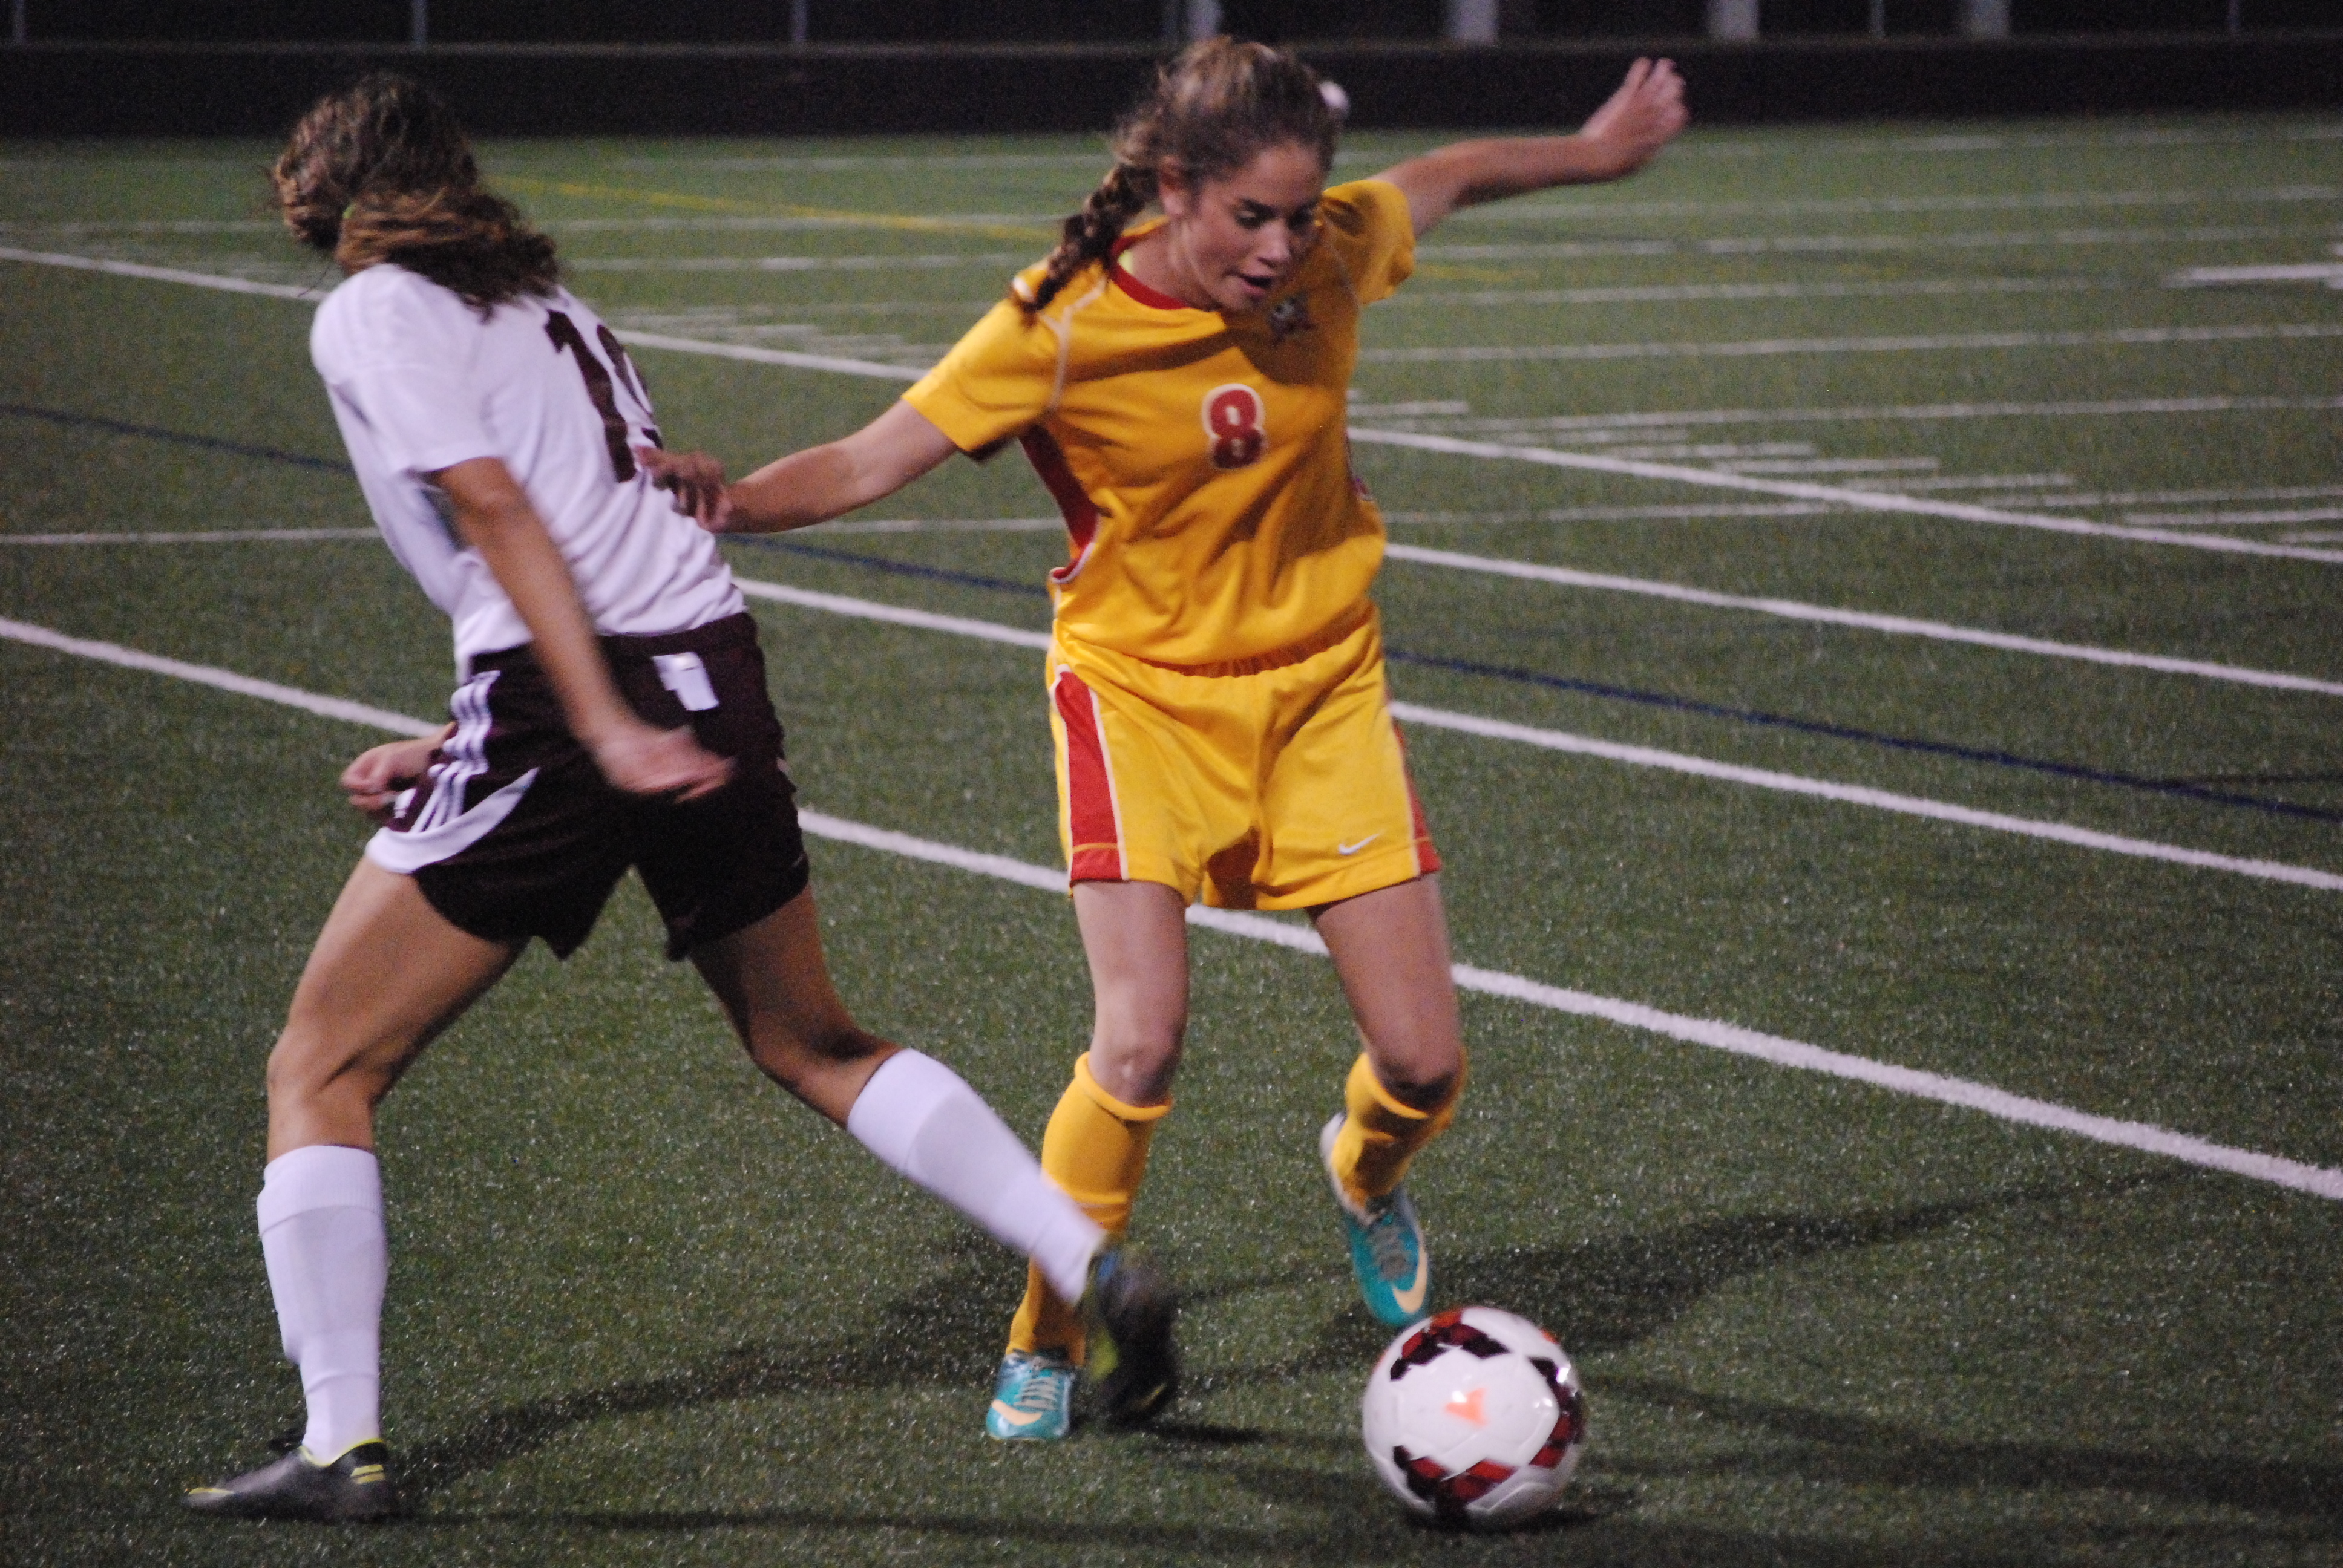 Fenwick sophomore Taylor Engle wins a ball against Columbus Academy sophomore Lily Rizk during first-half action the Division III regional semifinal match Tuesday night at Hilliard Bradley High School. Fenwick won the game 2-0 to advance to Saturdays regional final.